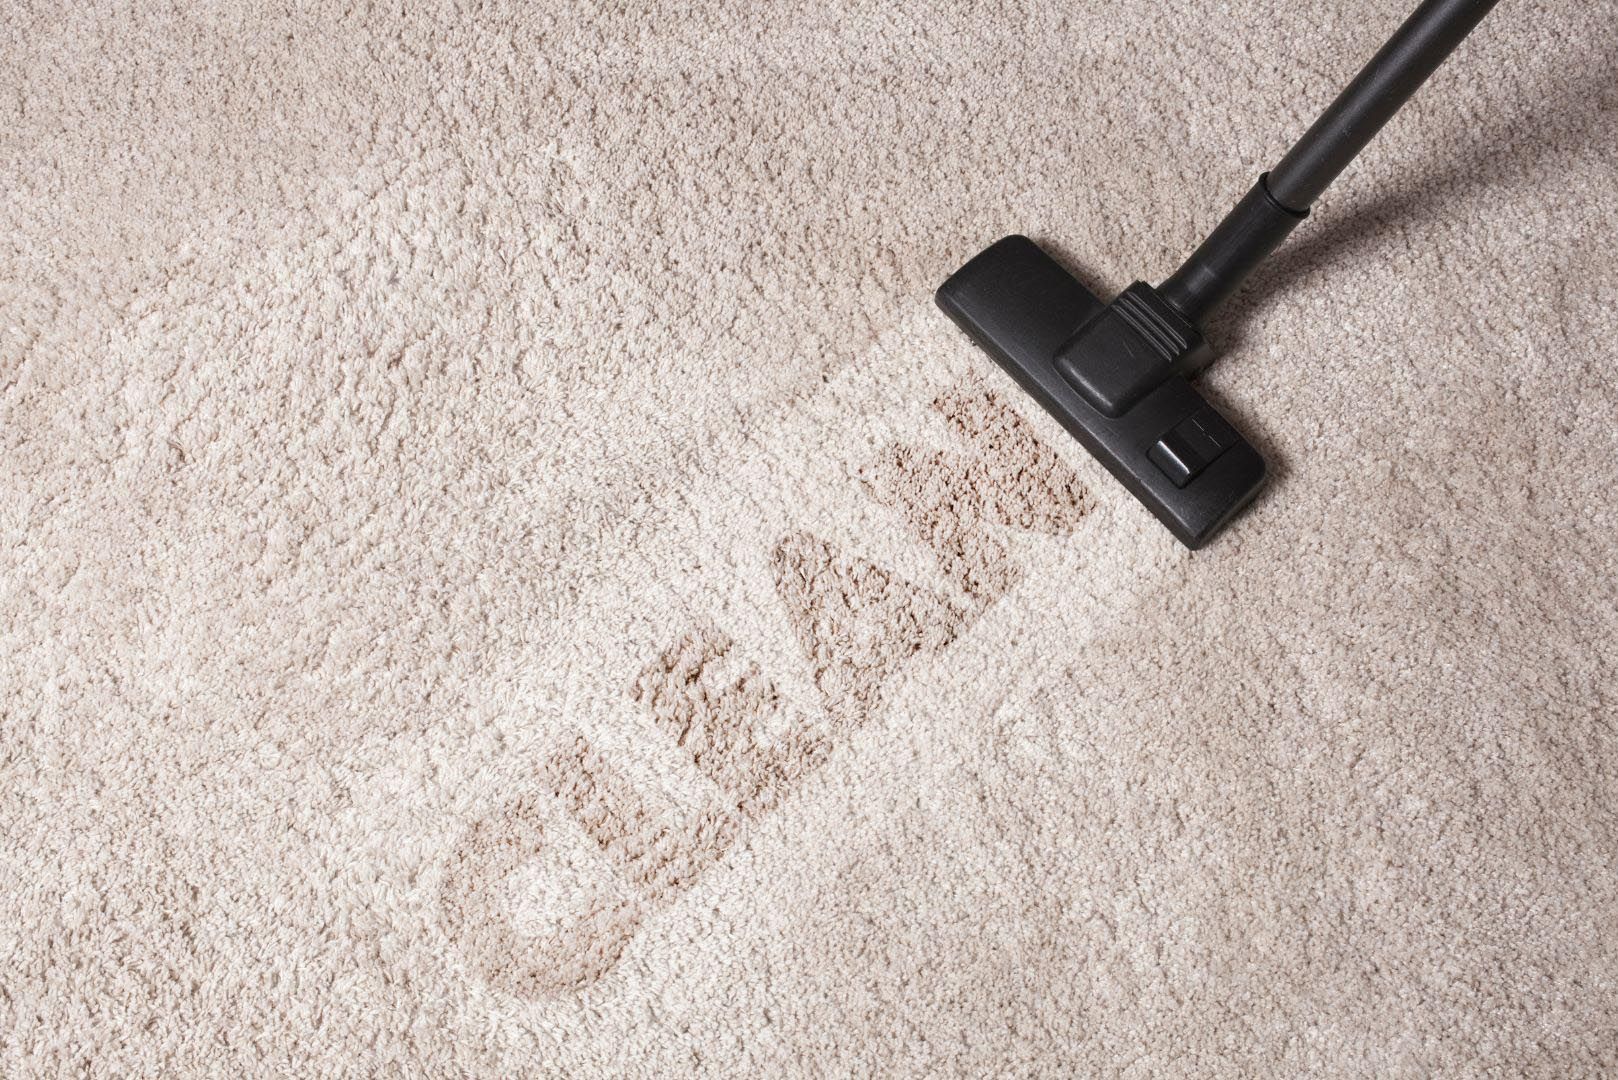 A vacuum cleaner is cleaning a carpet with the word clean written on it.